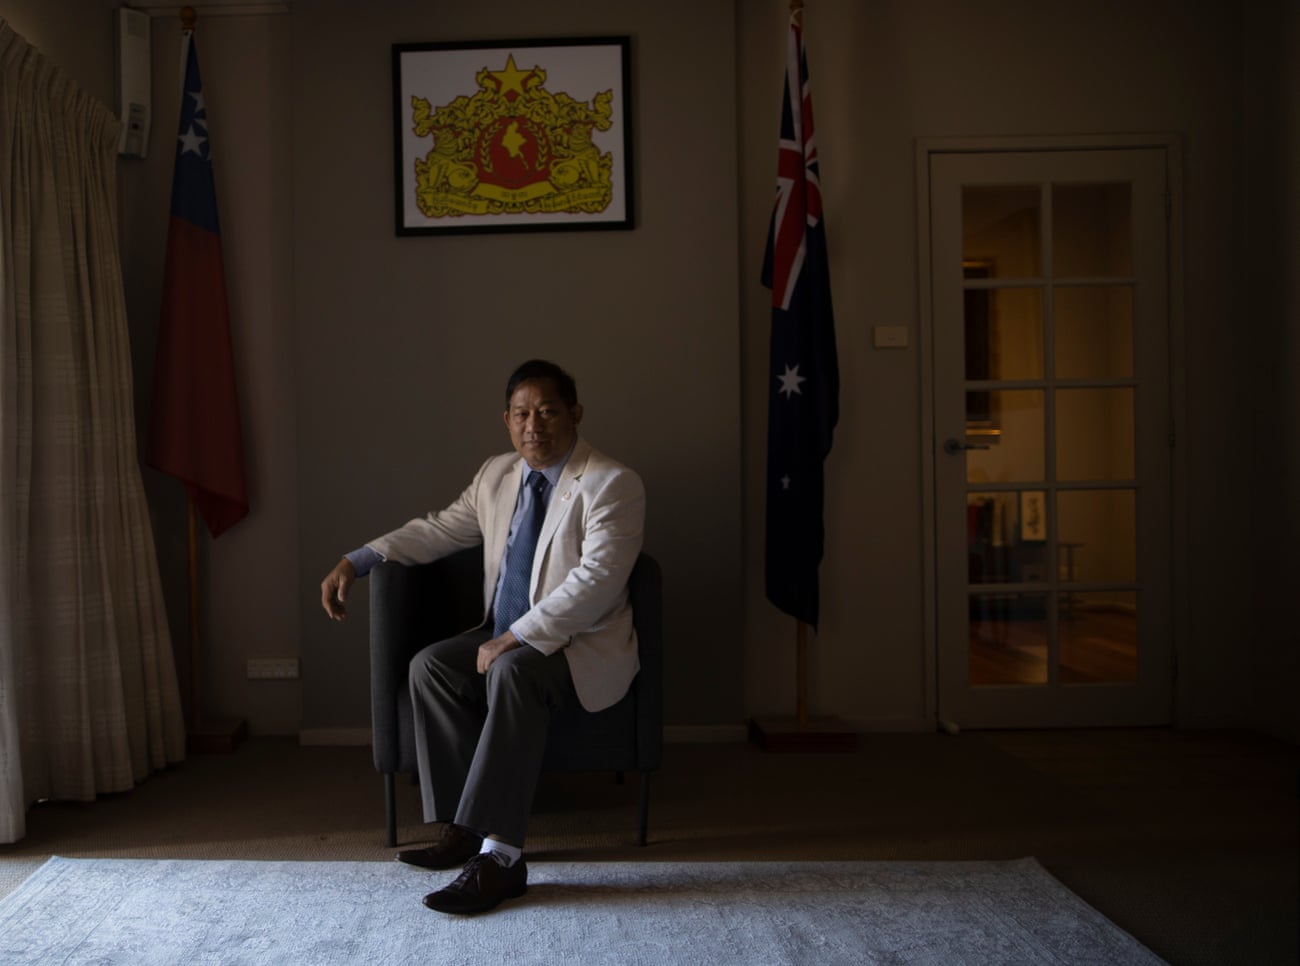 Dr Tun-Aung Shwe at the Myanmar national unity government’s shadow embassy in Canberra, Australia